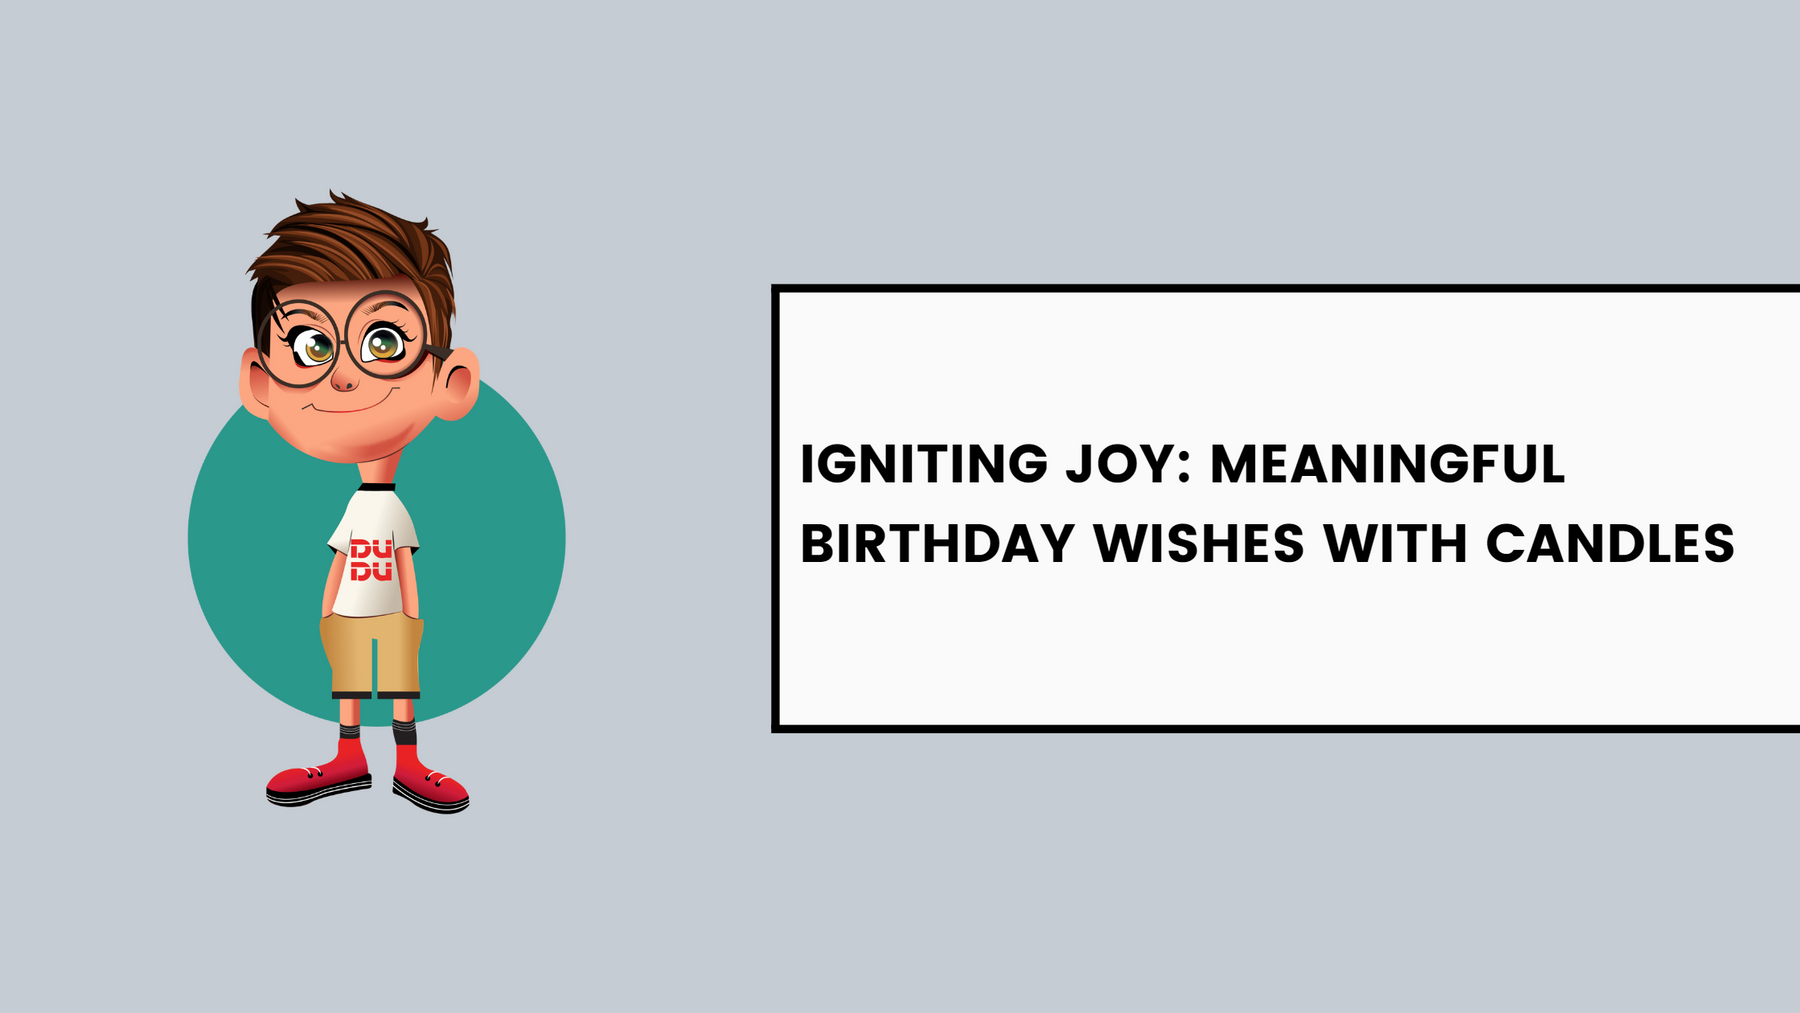 Igniting Joy: Meaningful Birthday Wishes with Candles